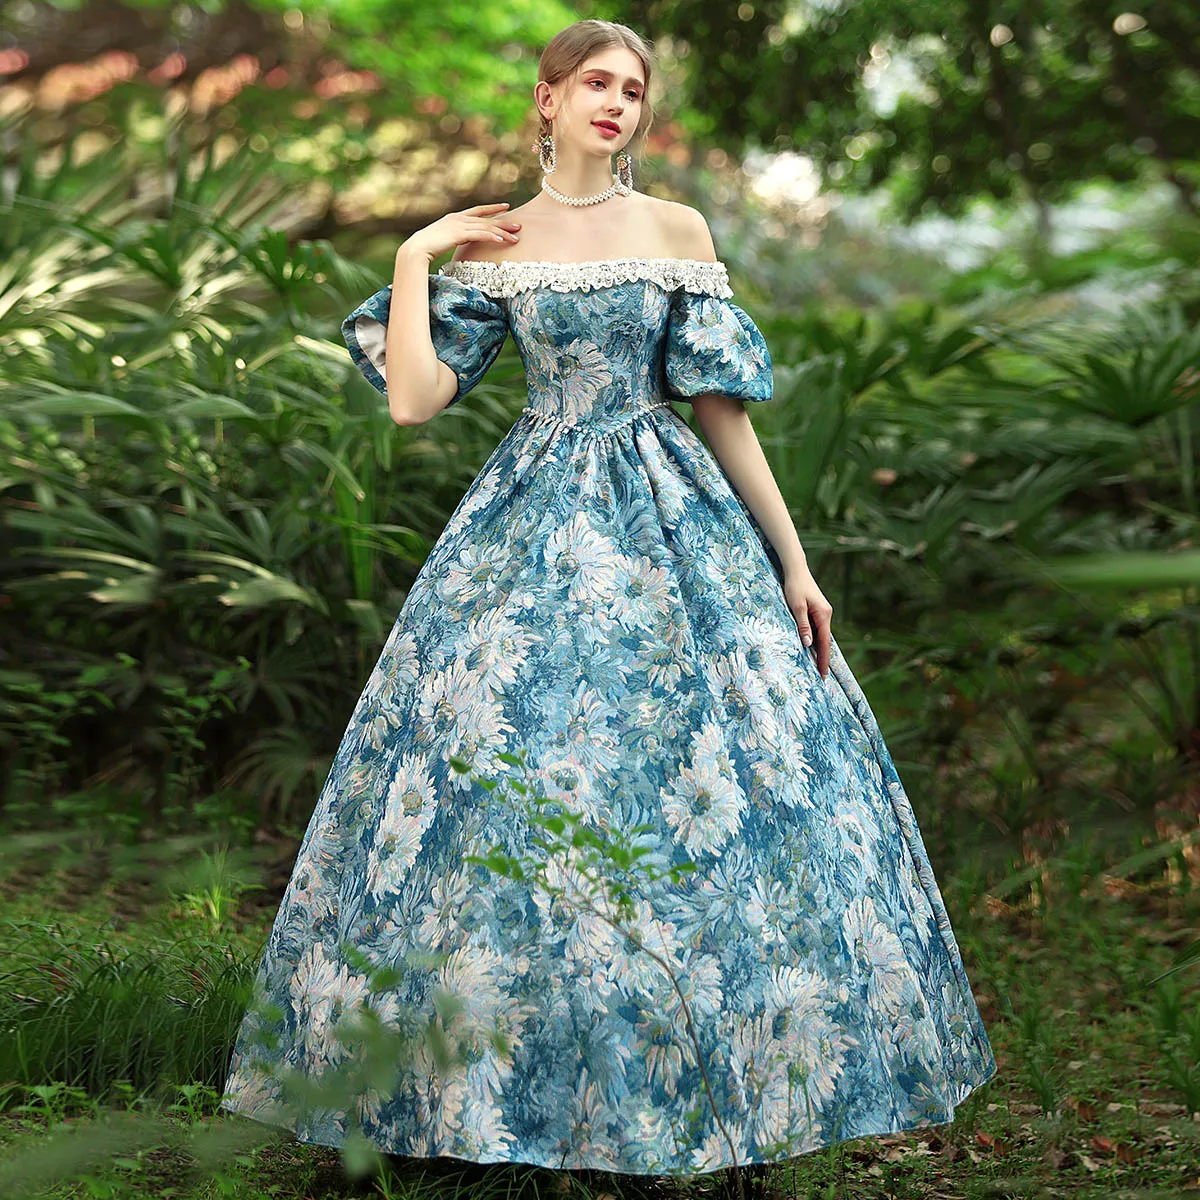 Buy Women's Masquerade Party Dress Marie Antoinette Maxi Costume Ball Gowns,  Reto12, X-Small Online at Low Prices in India - Amazon.in